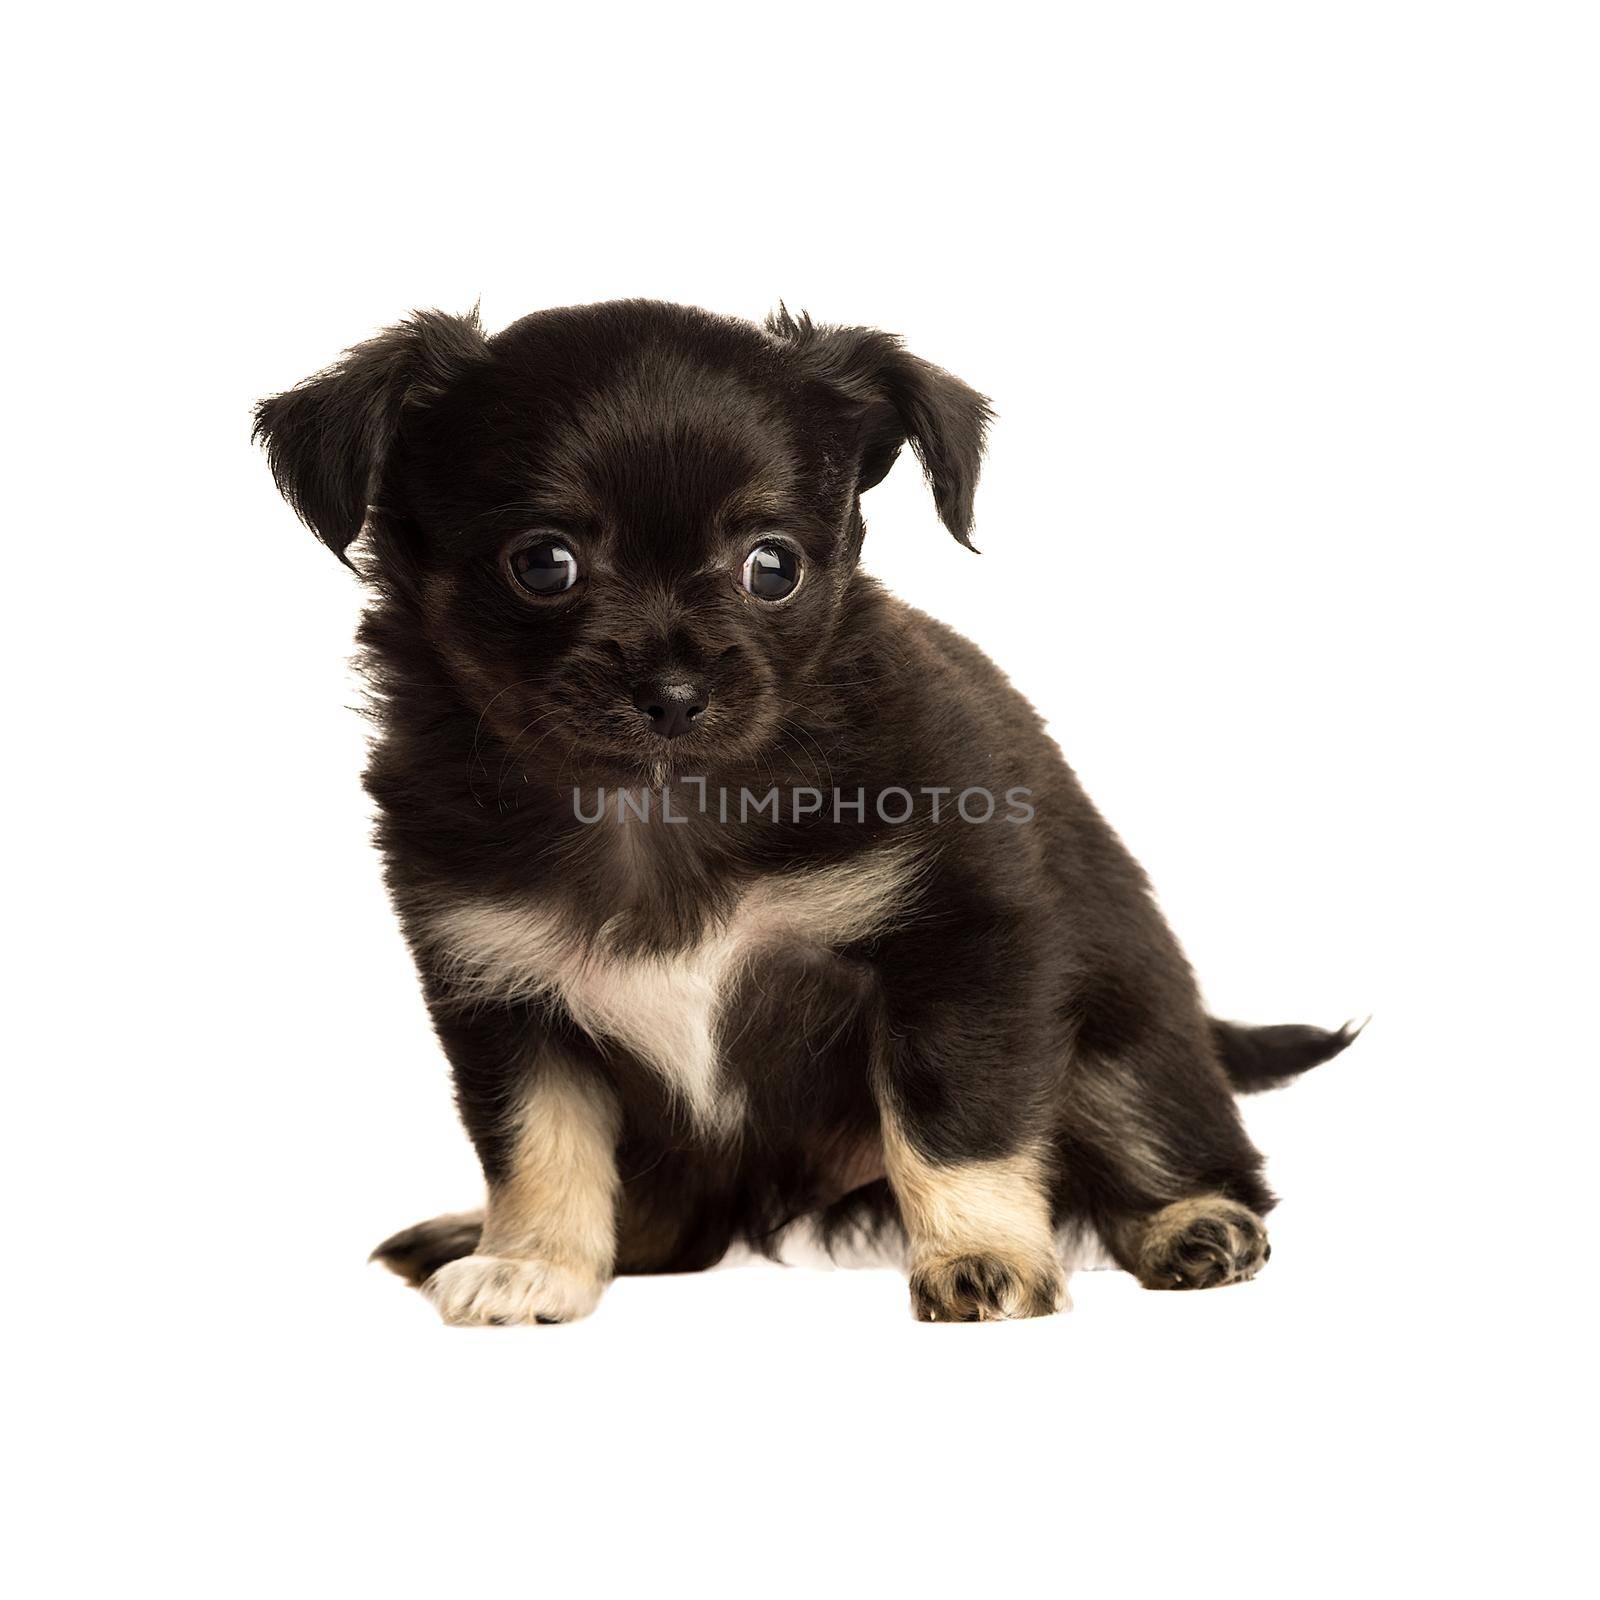 Cute little chihuahua puppy isolated in white background sitting